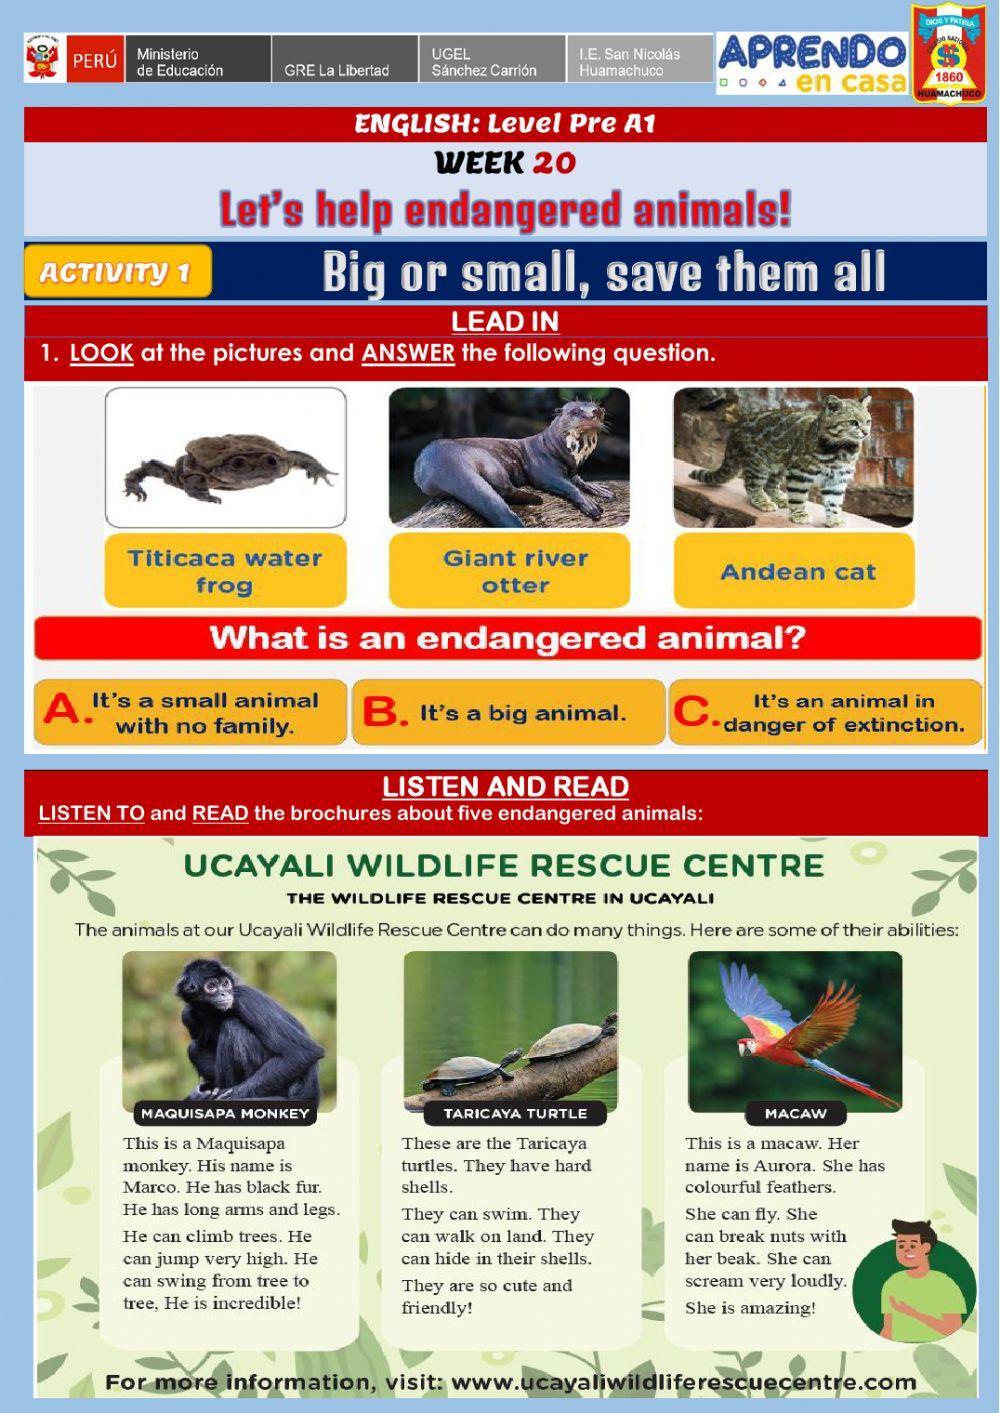 Let’s help endangered animals! - Big or small, save them all